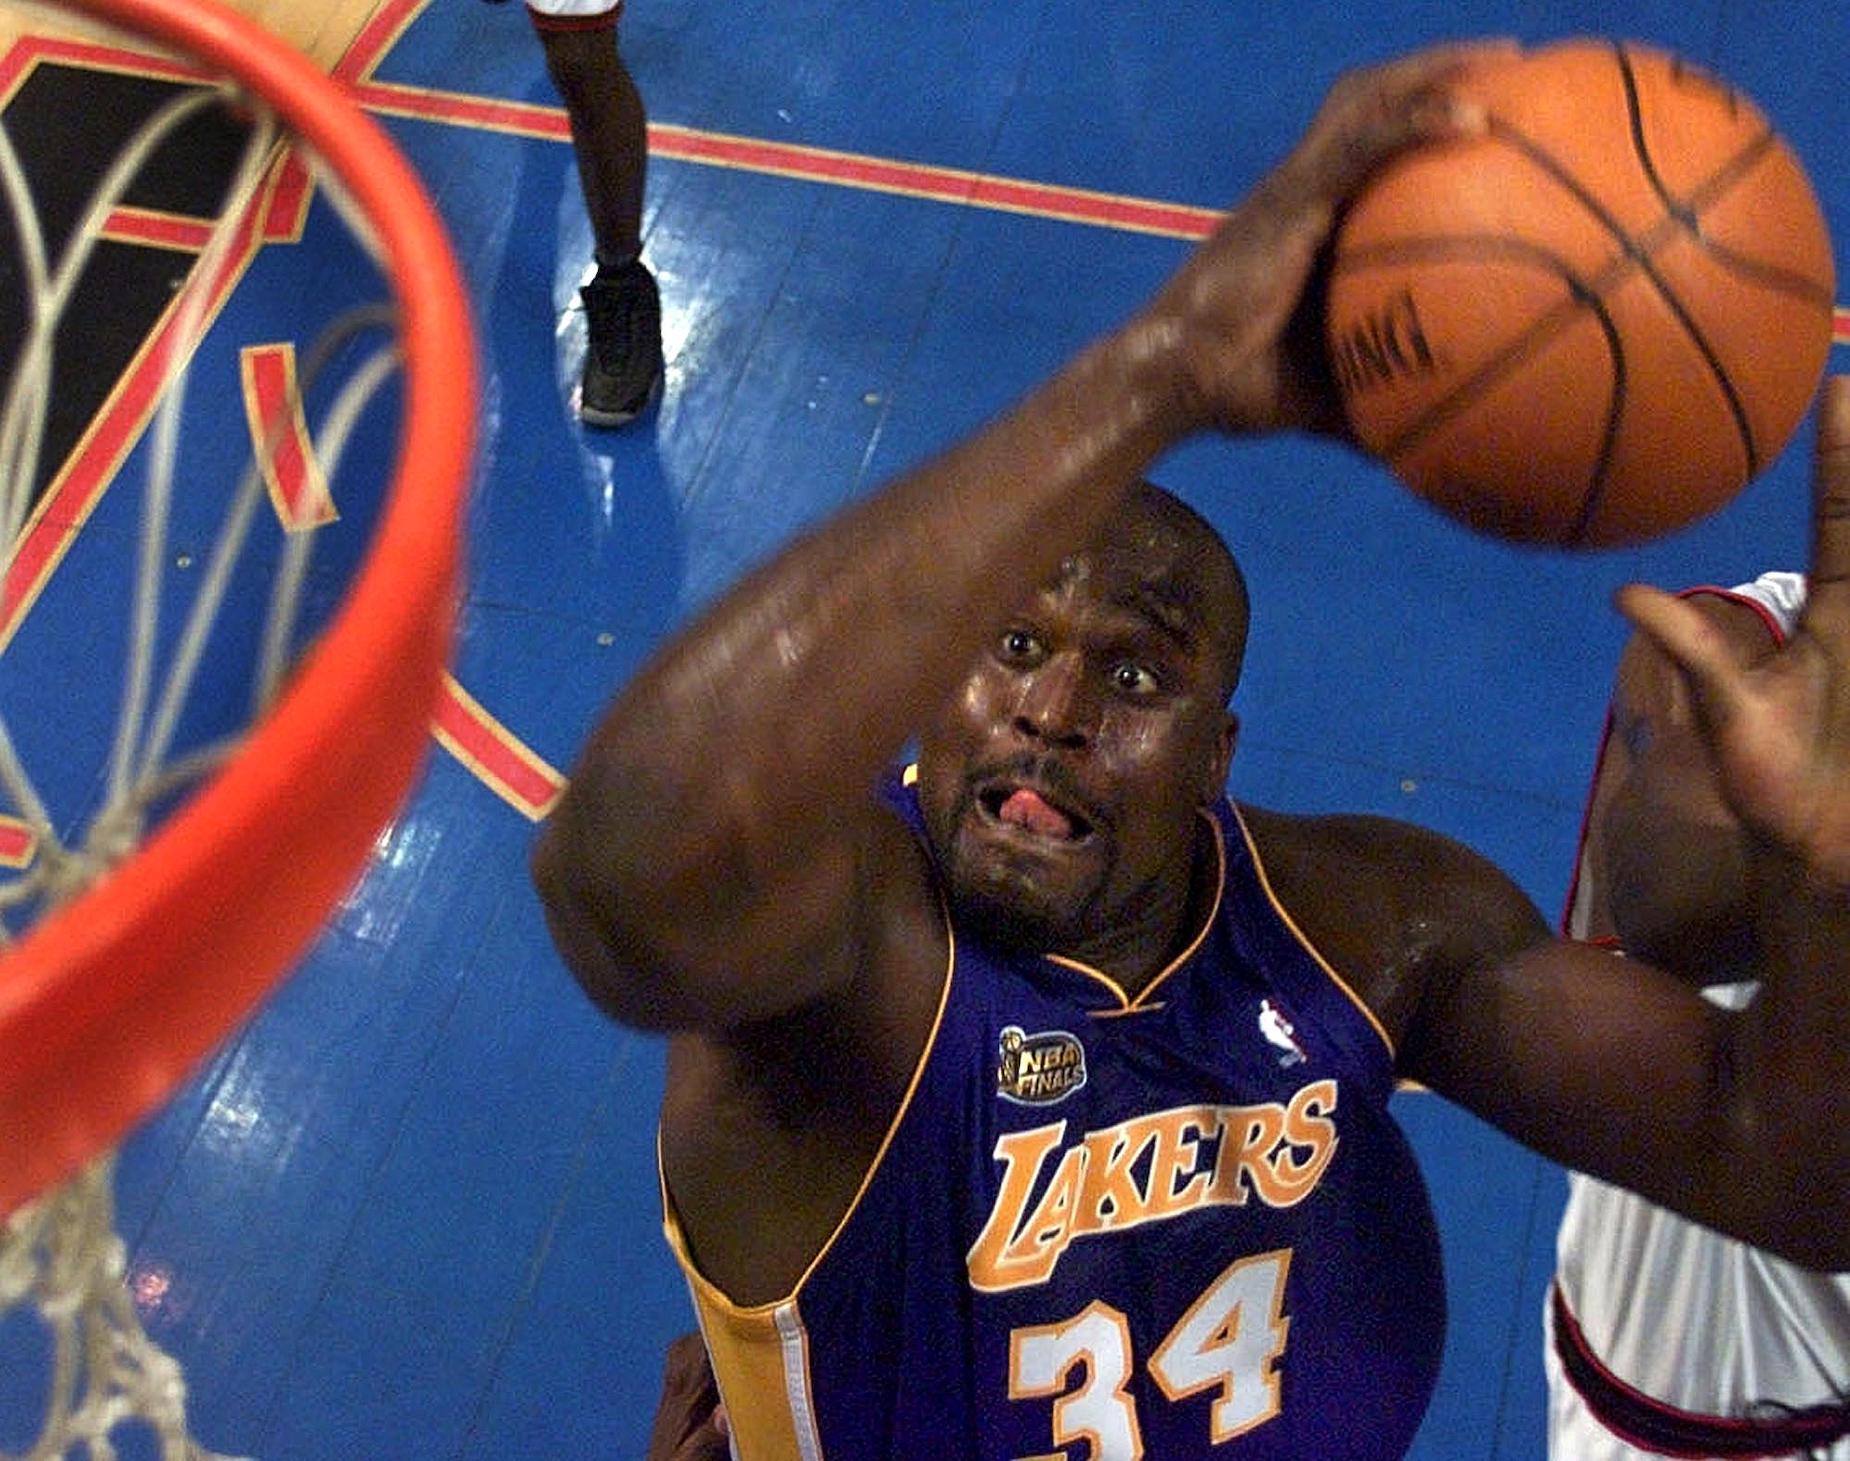 Shaquille O'Neal throws down a dunk during his time with the LA Lakers.